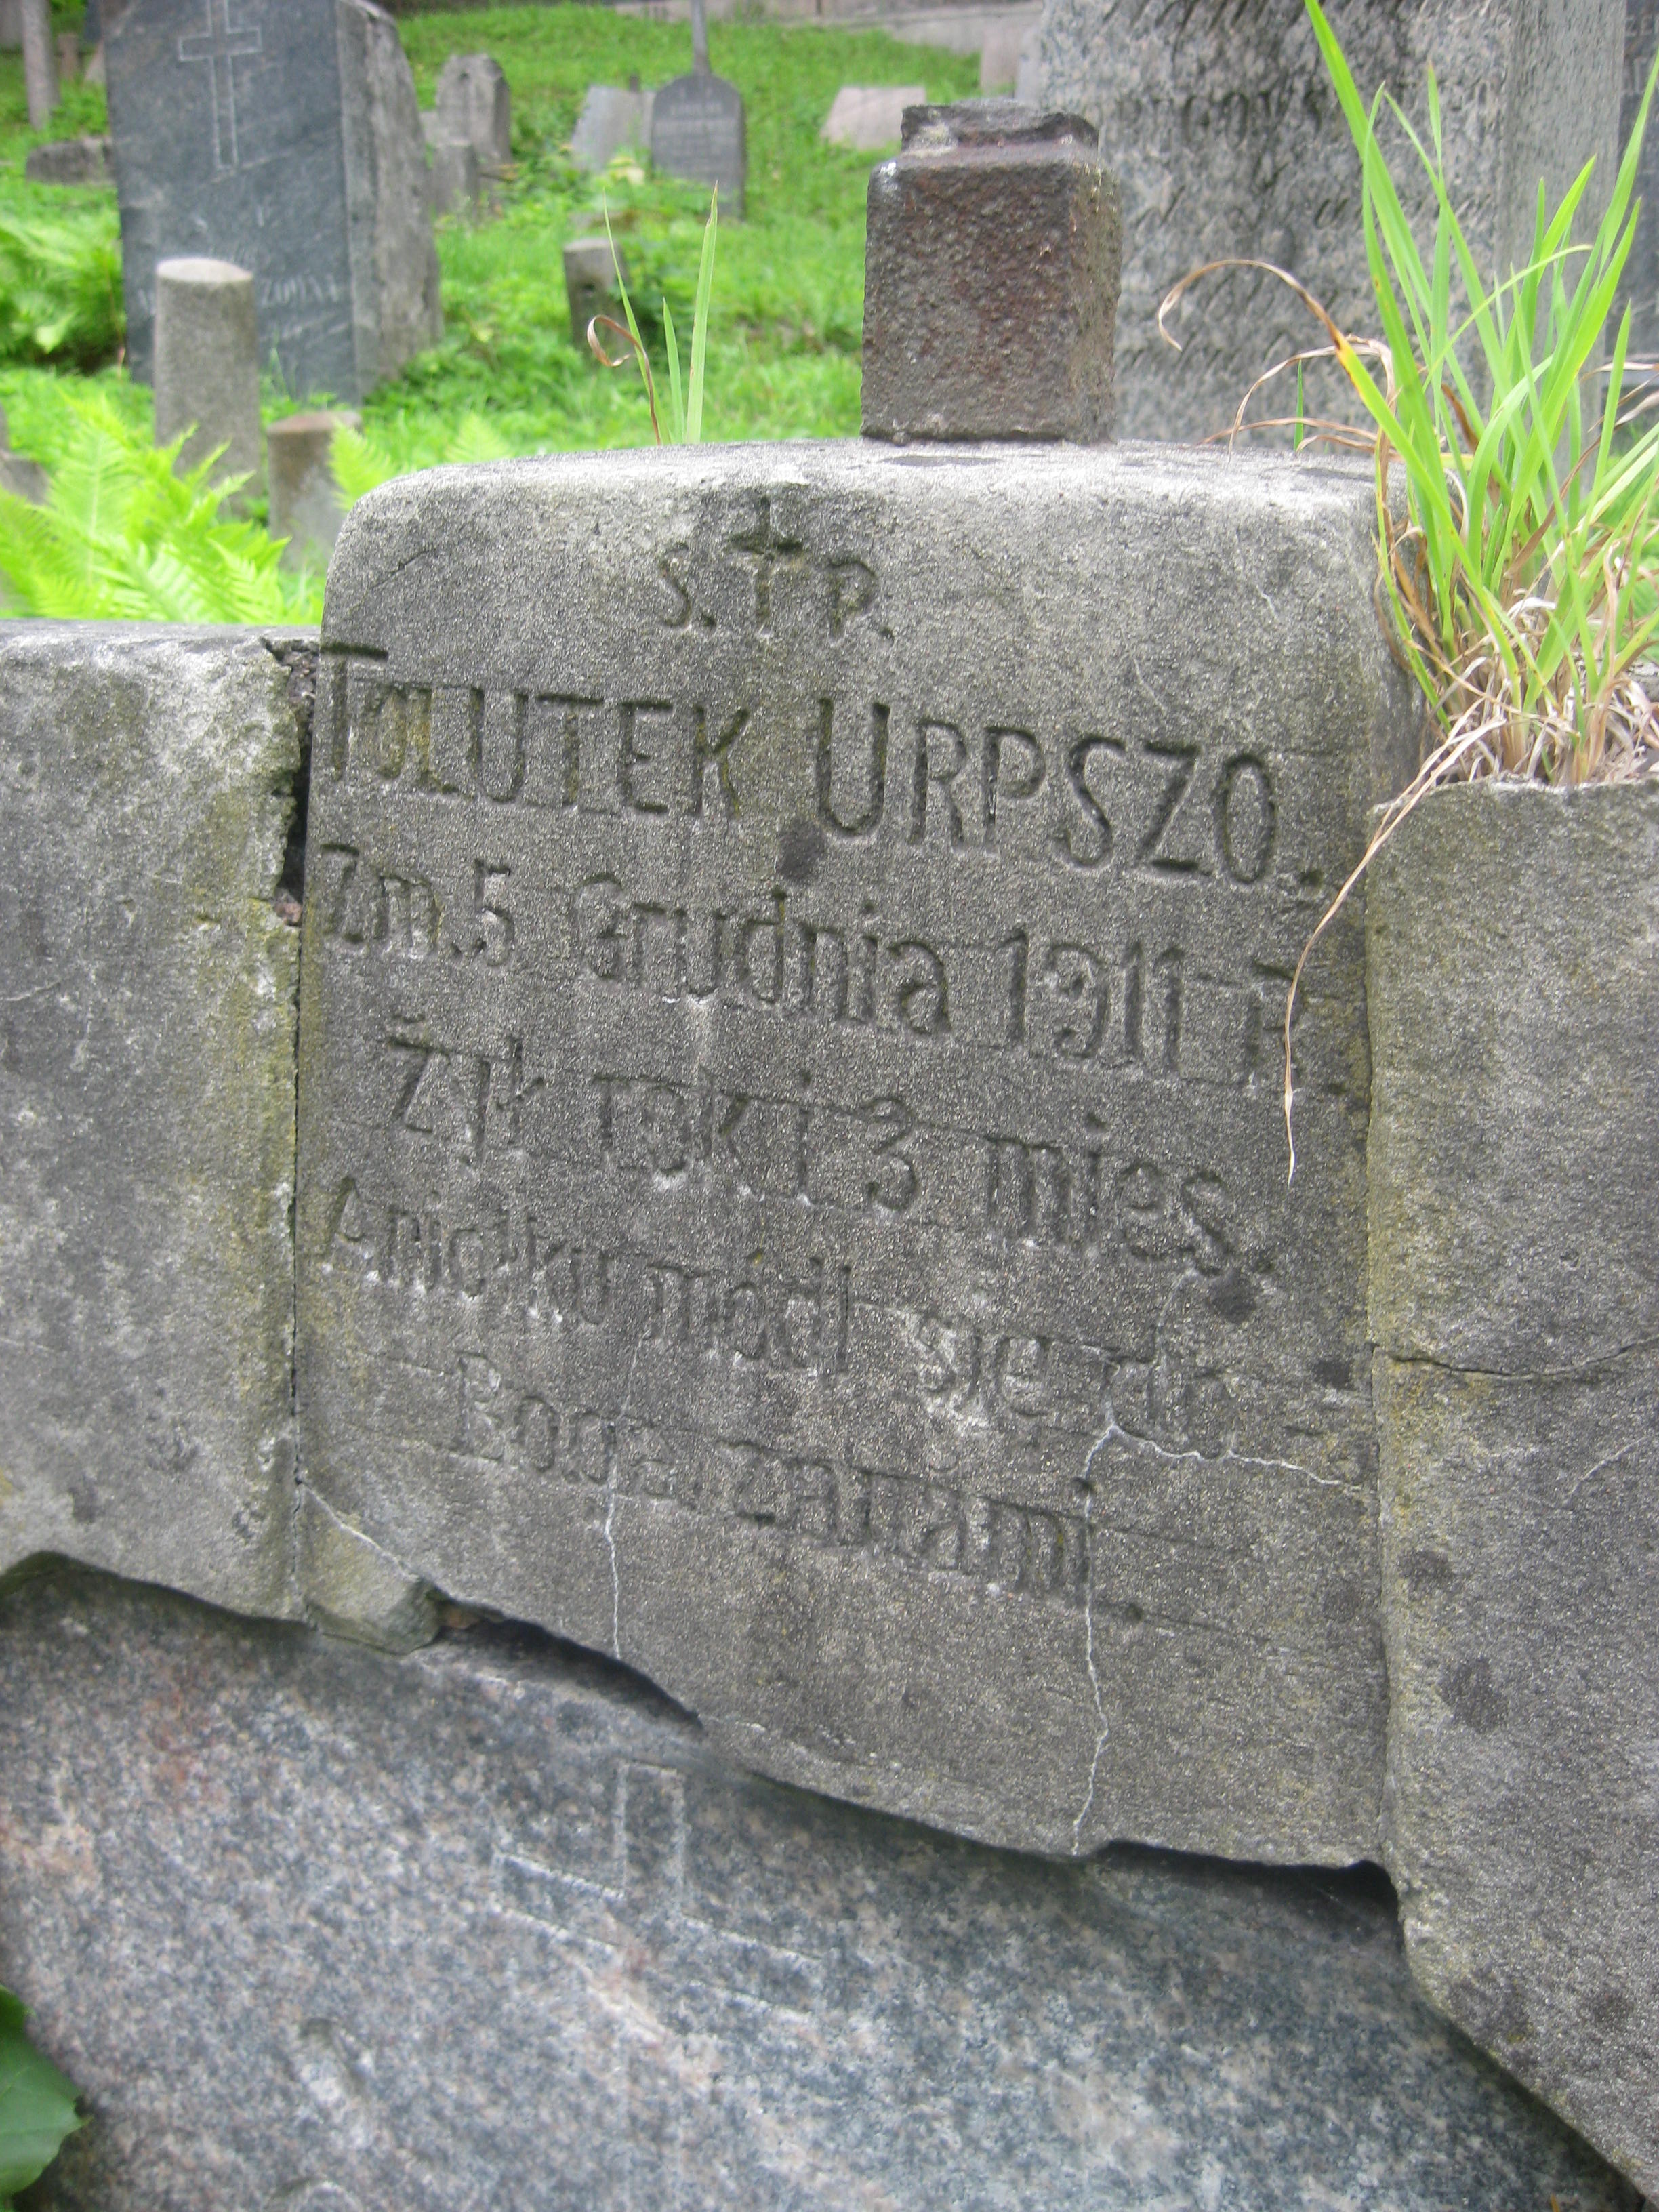 Tombstone of Anatol Urpszo, Ross cemetery, state of 2013